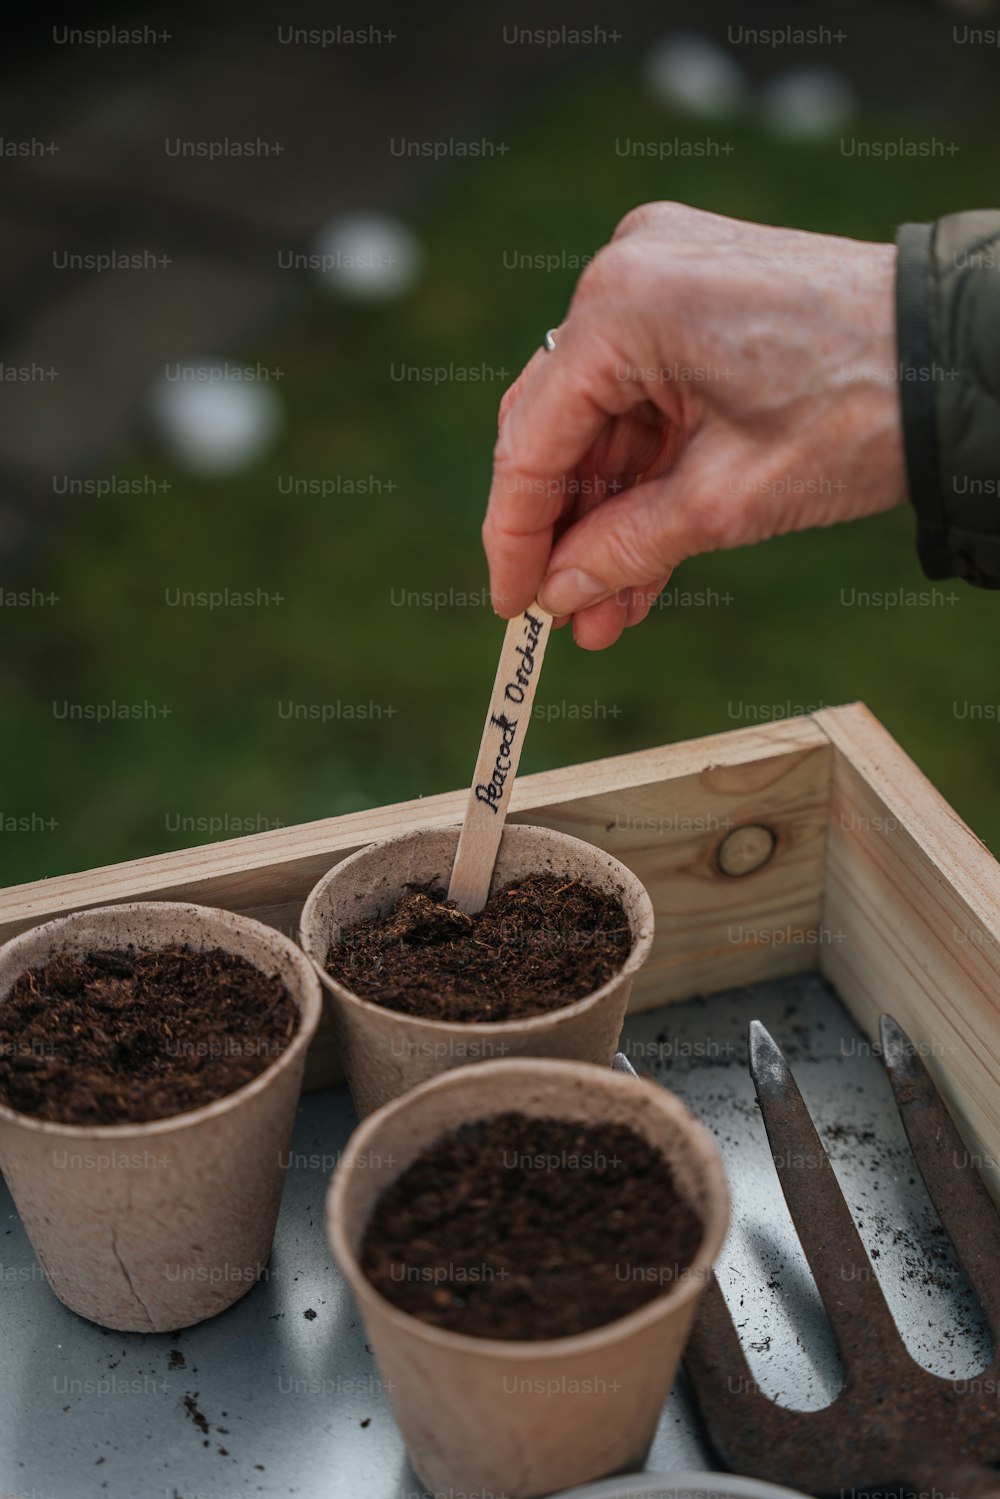 a person holding a wooden spoon over a tray of dirt